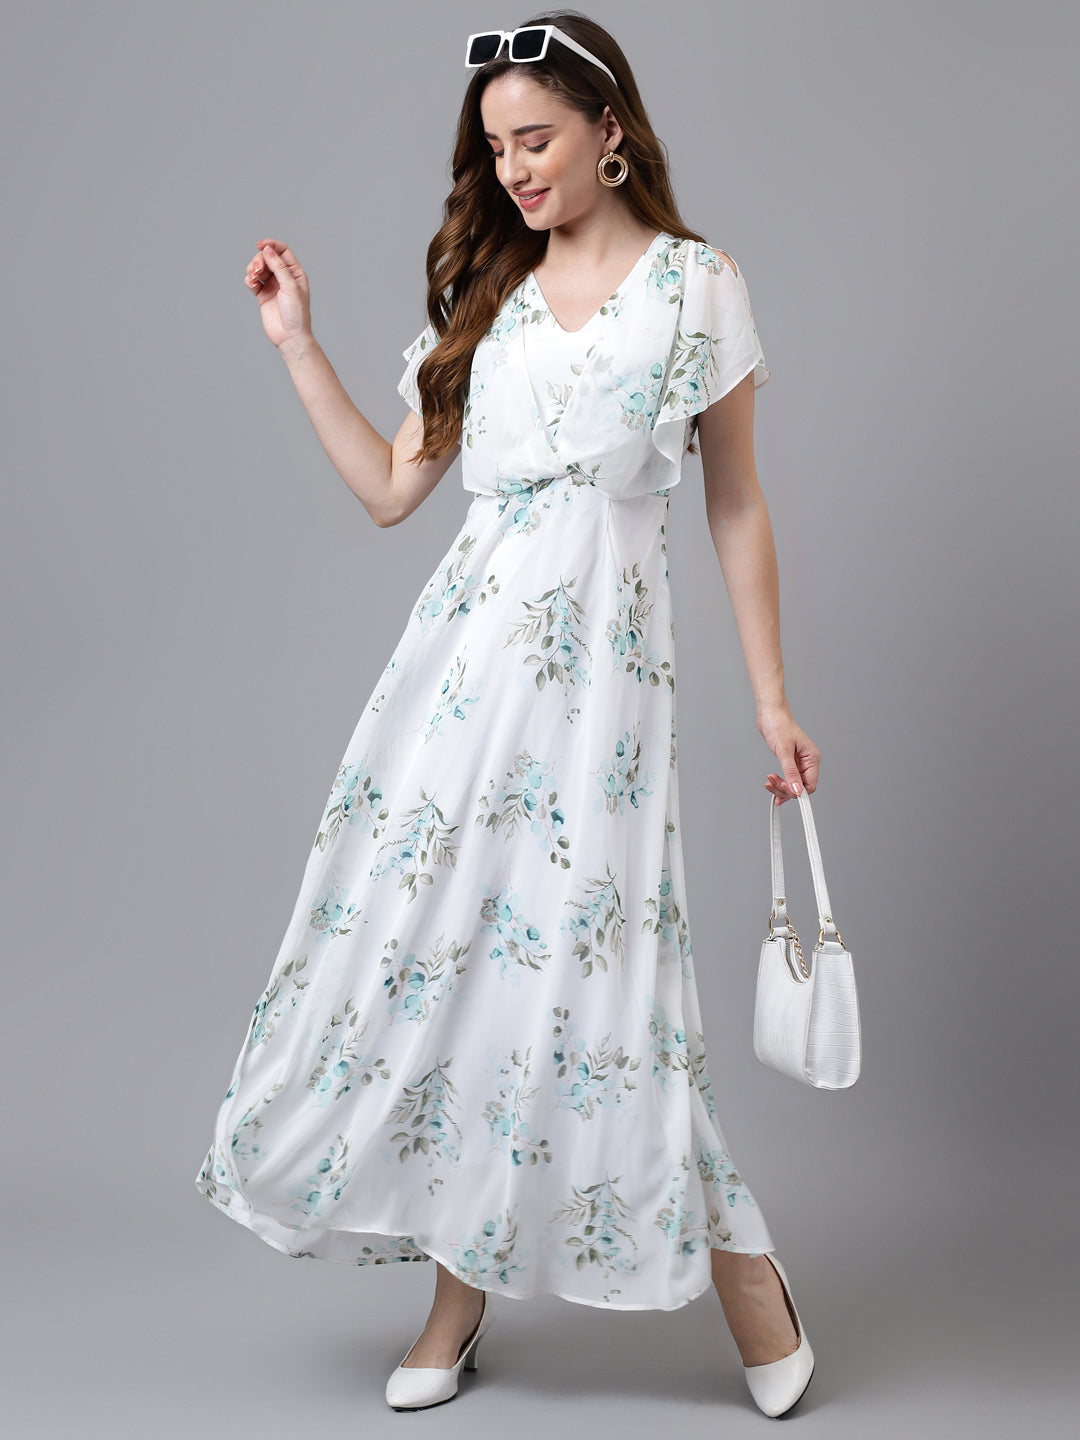 Green Cap Sleeve V-Neck Printed Women Maxi Dress For Casual